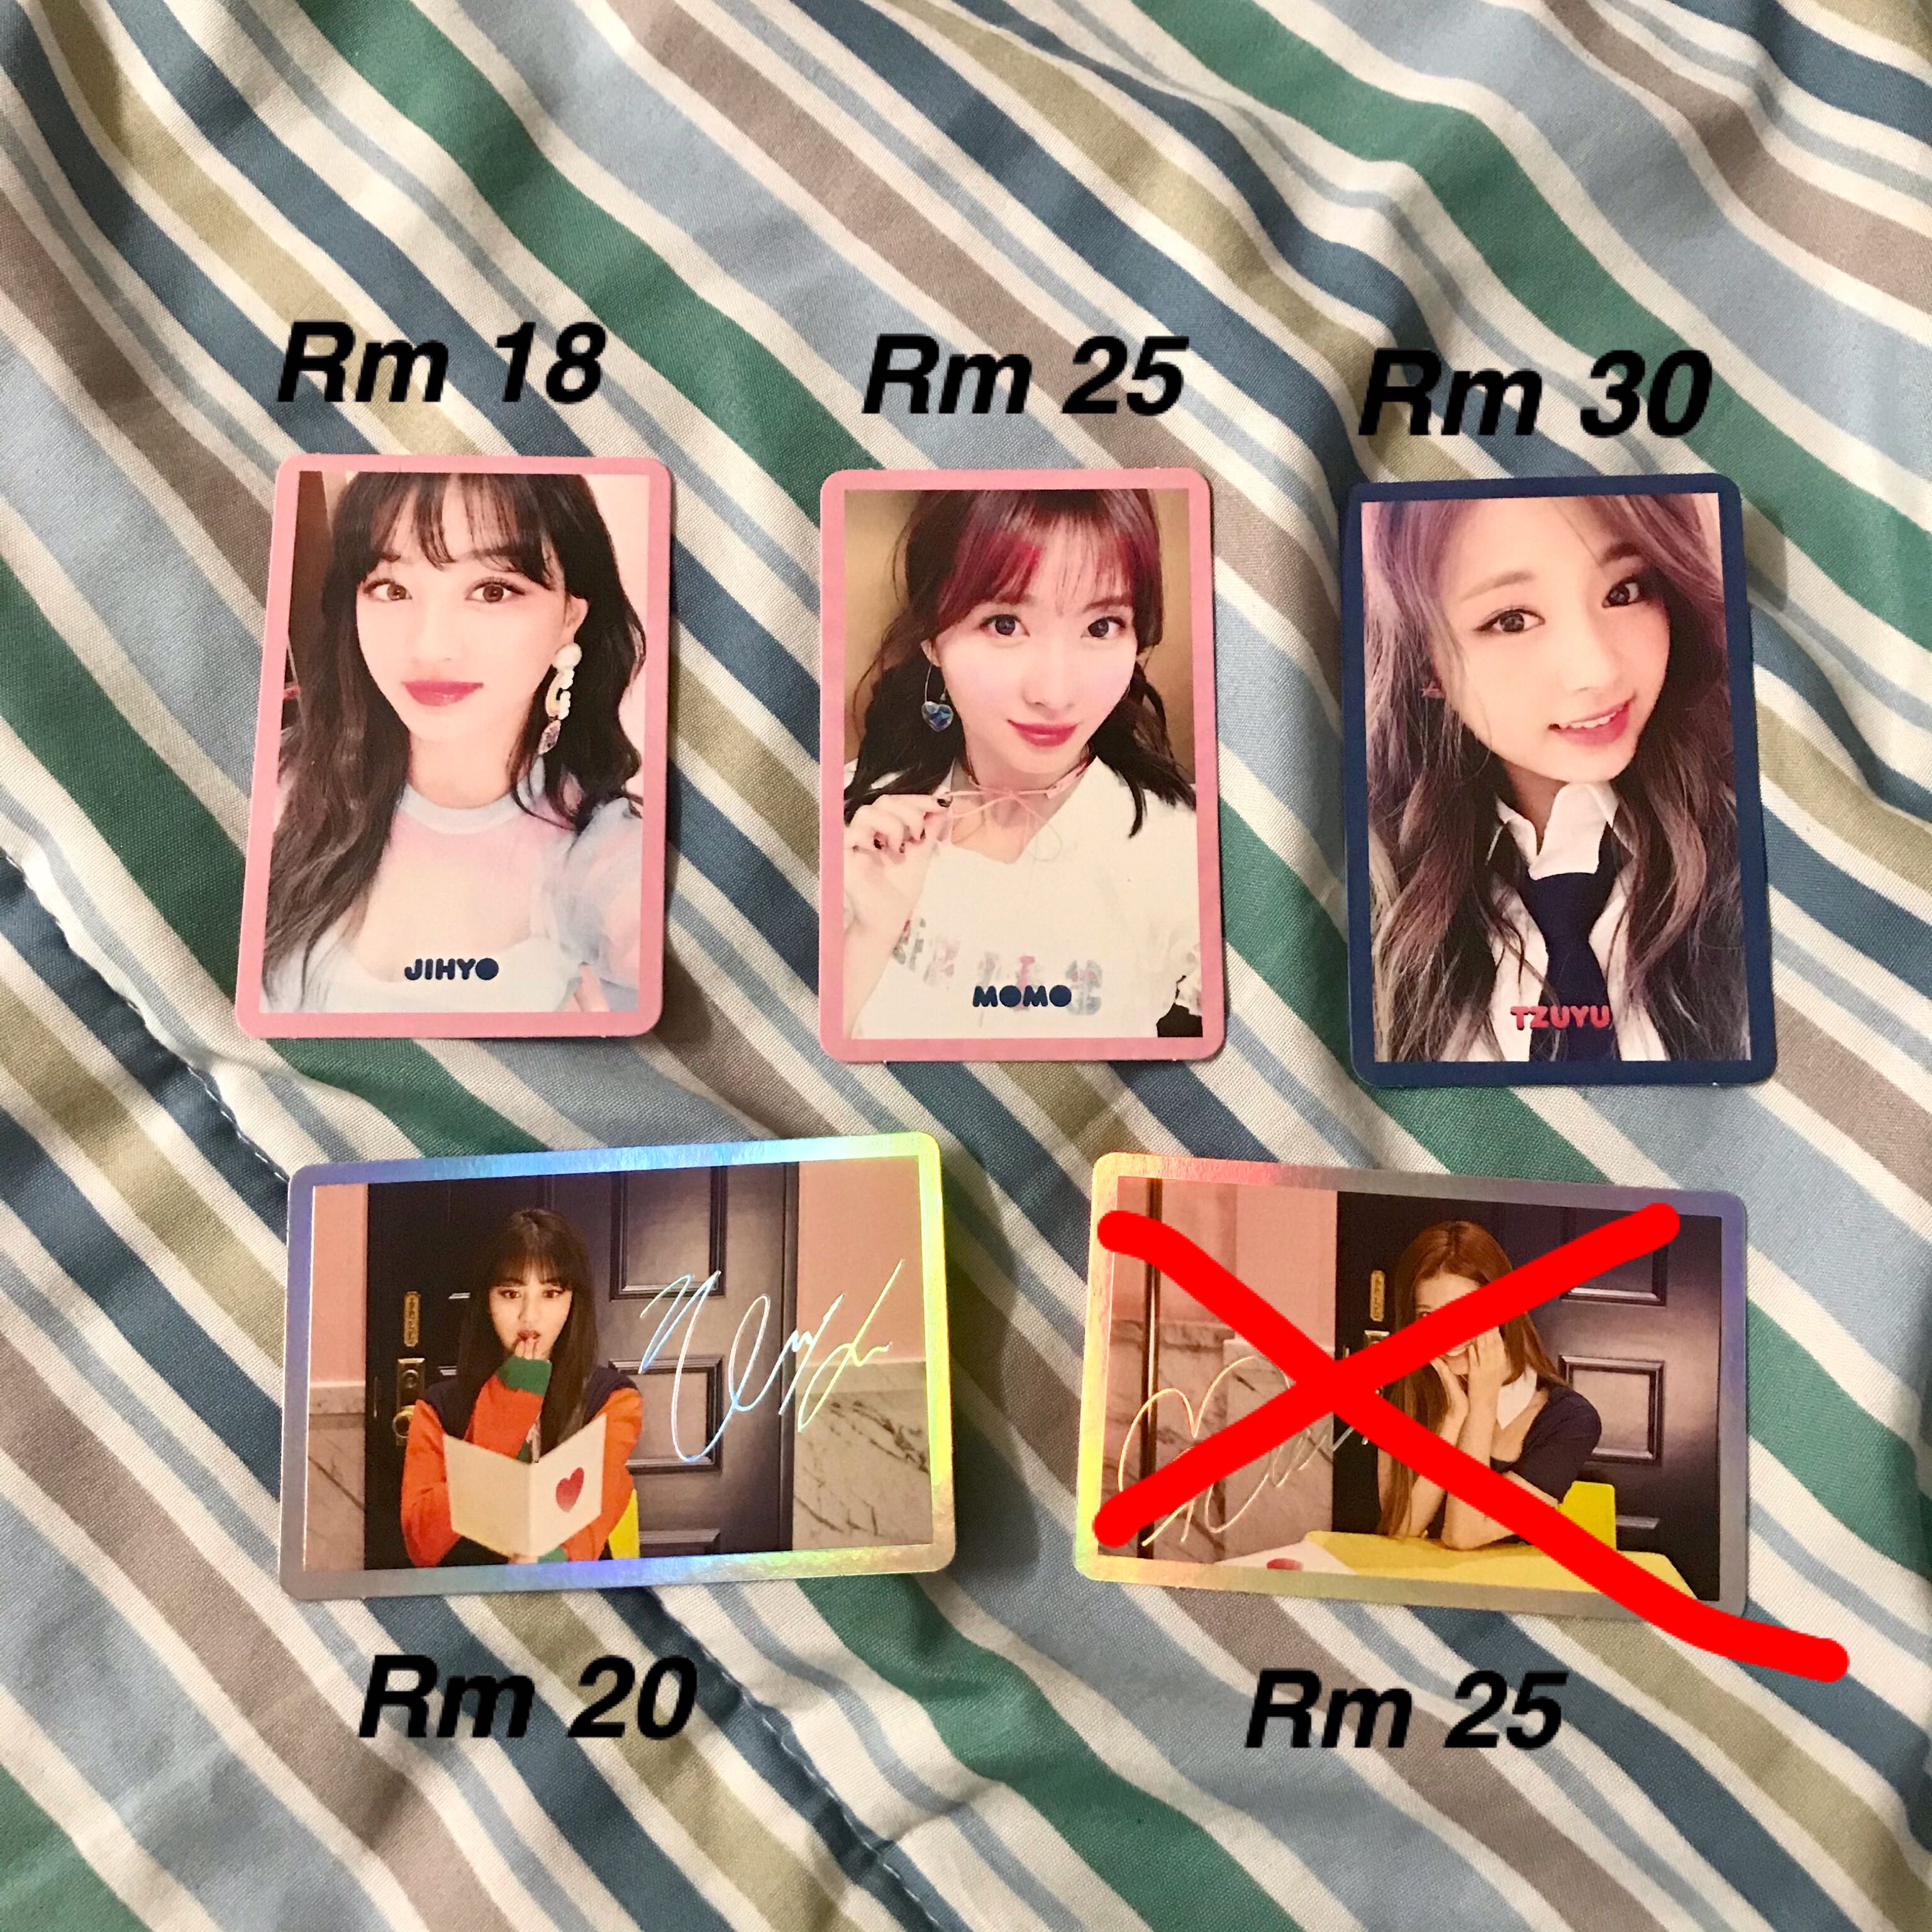 Wts Twice Signal Photocard Hobbies Toys Collectibles Memorabilia K Wave On Carousell